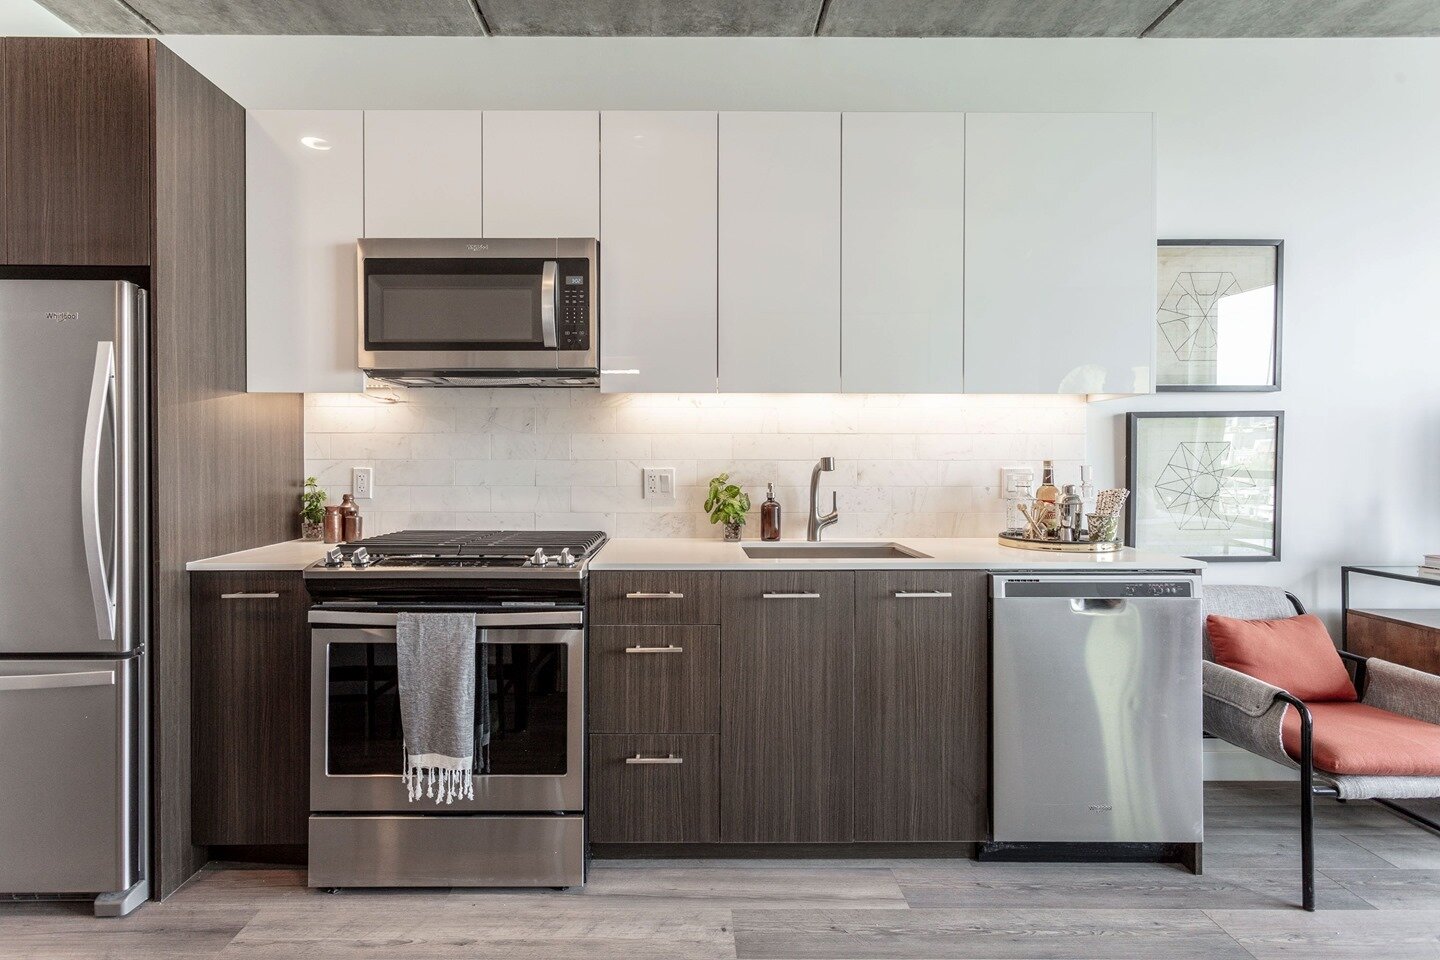 Wicker Park Connection is now offering up to 3 months free on select lease terms. Connect with our team today to schedule your exclusive showing and explore more today ✨